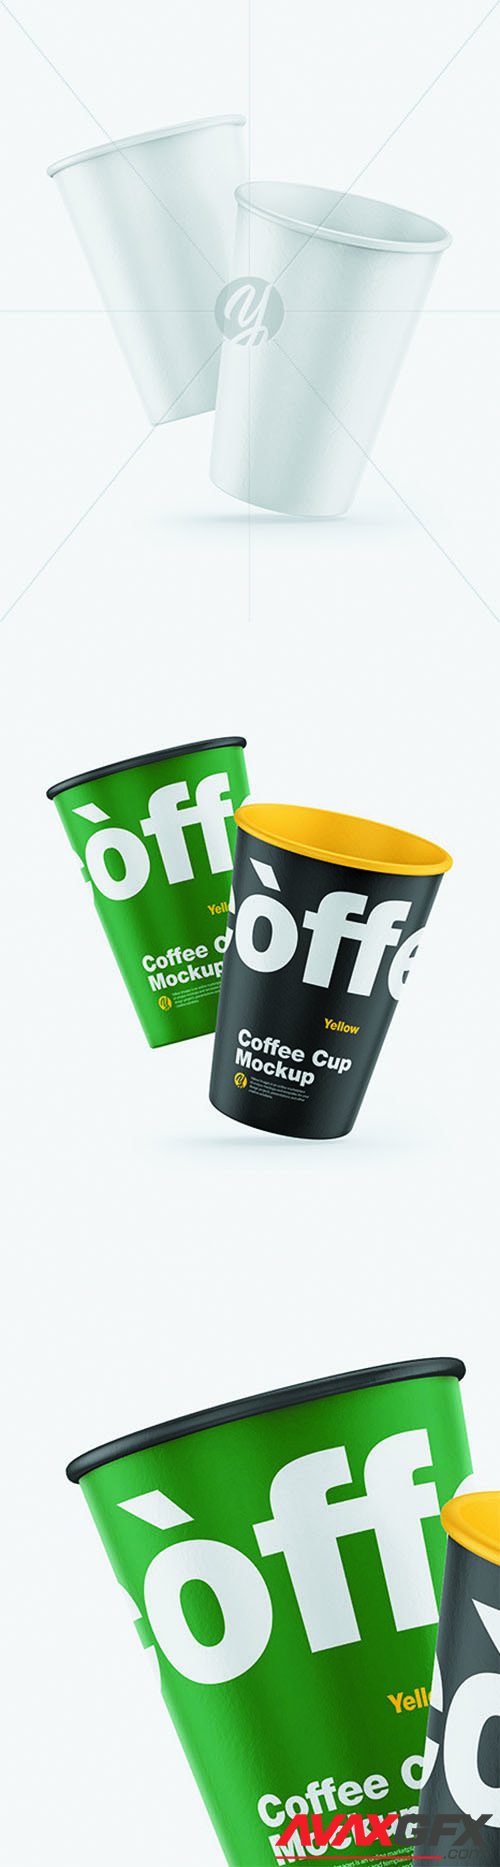 Paper Coffee Cup Mockup 66040